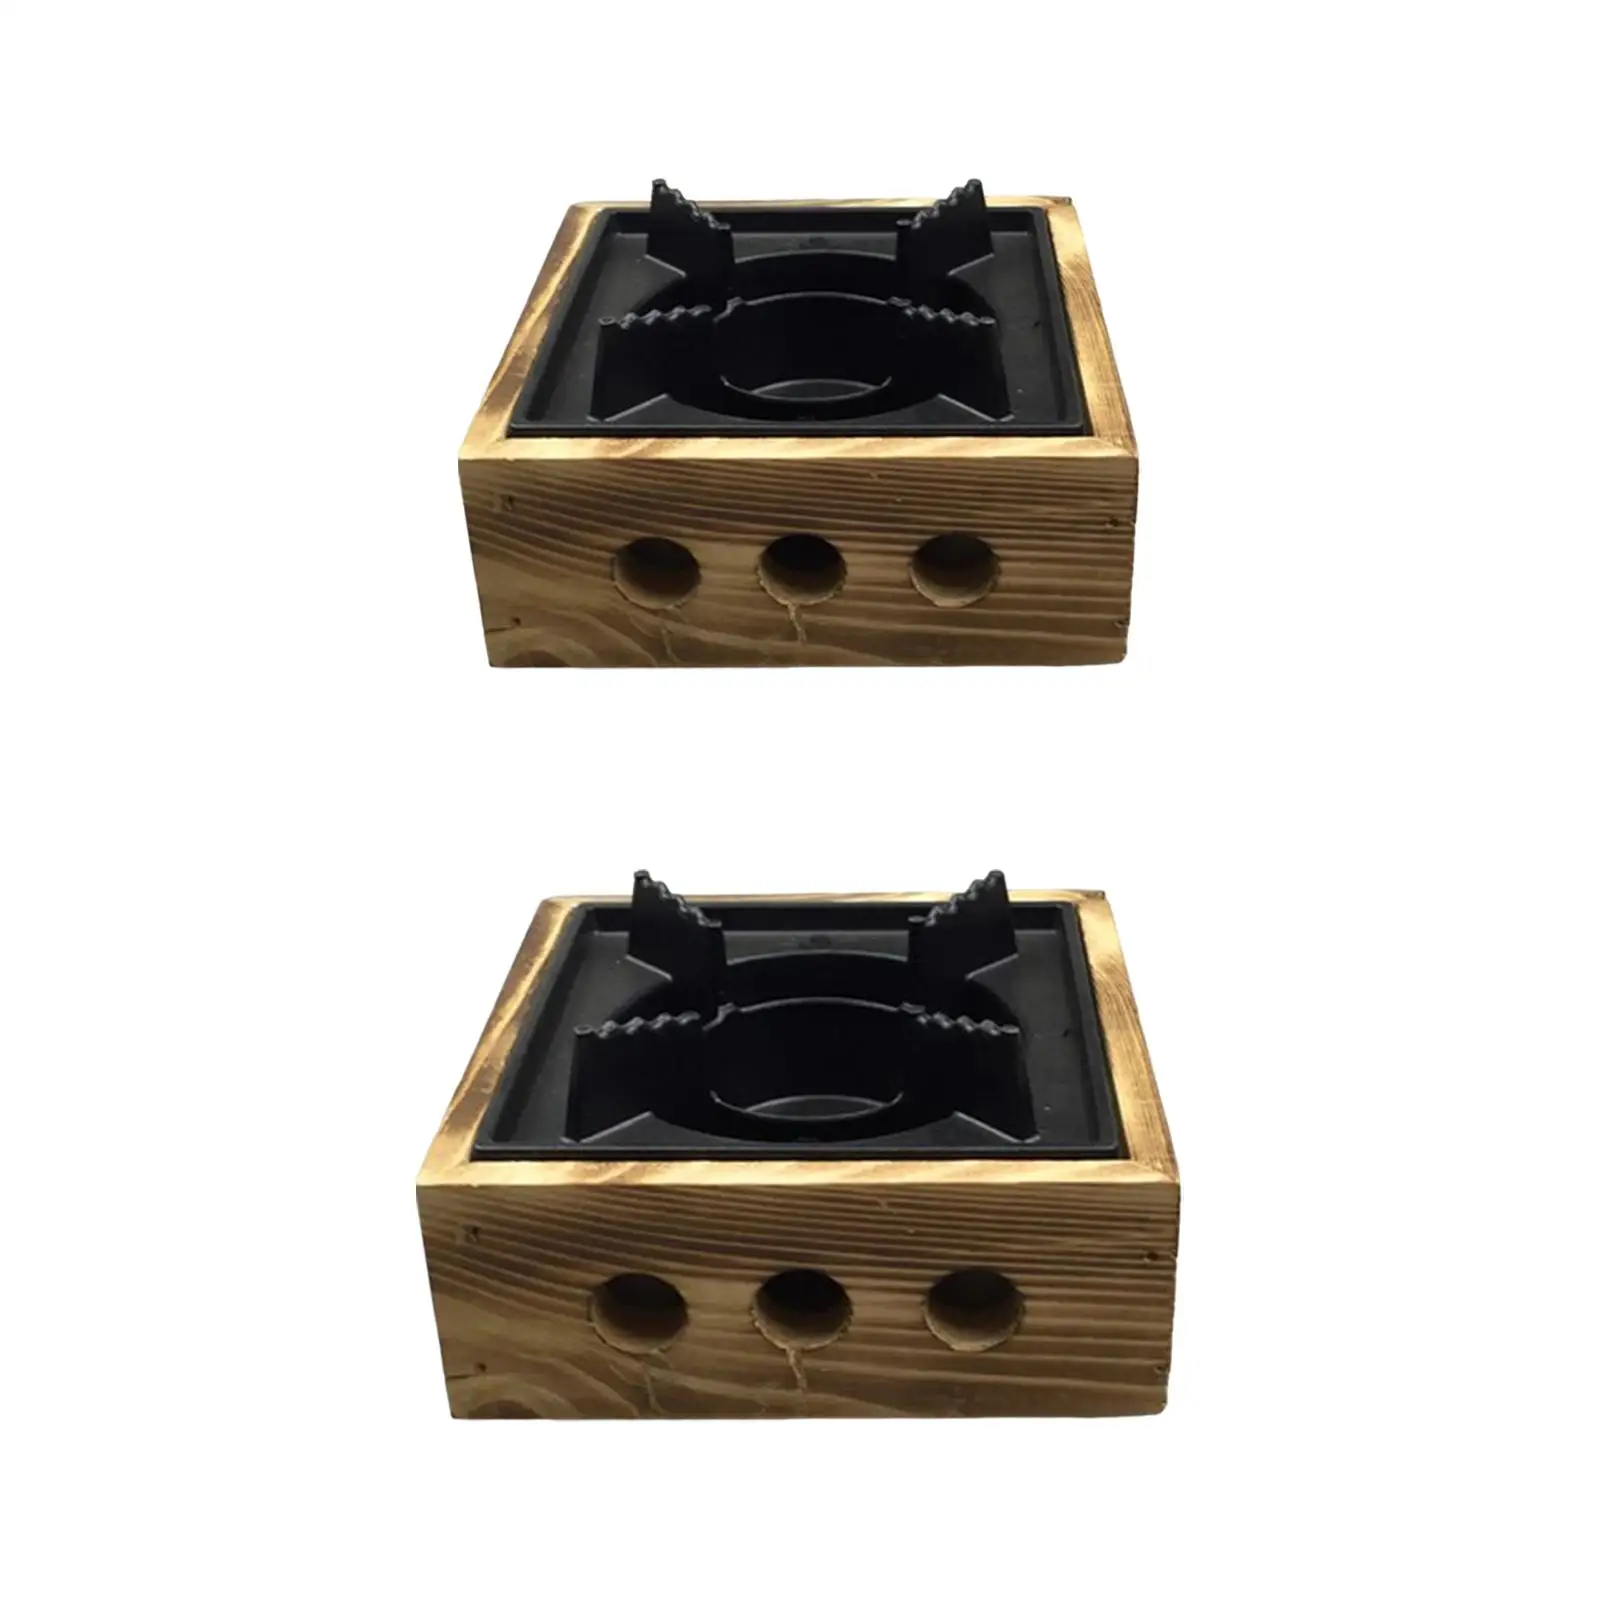 Compact Alcohol Stoves Burner Stew Hot Pot with Wooden Base Square Spirit Burner for Camping Hiking Outdoor Picnic